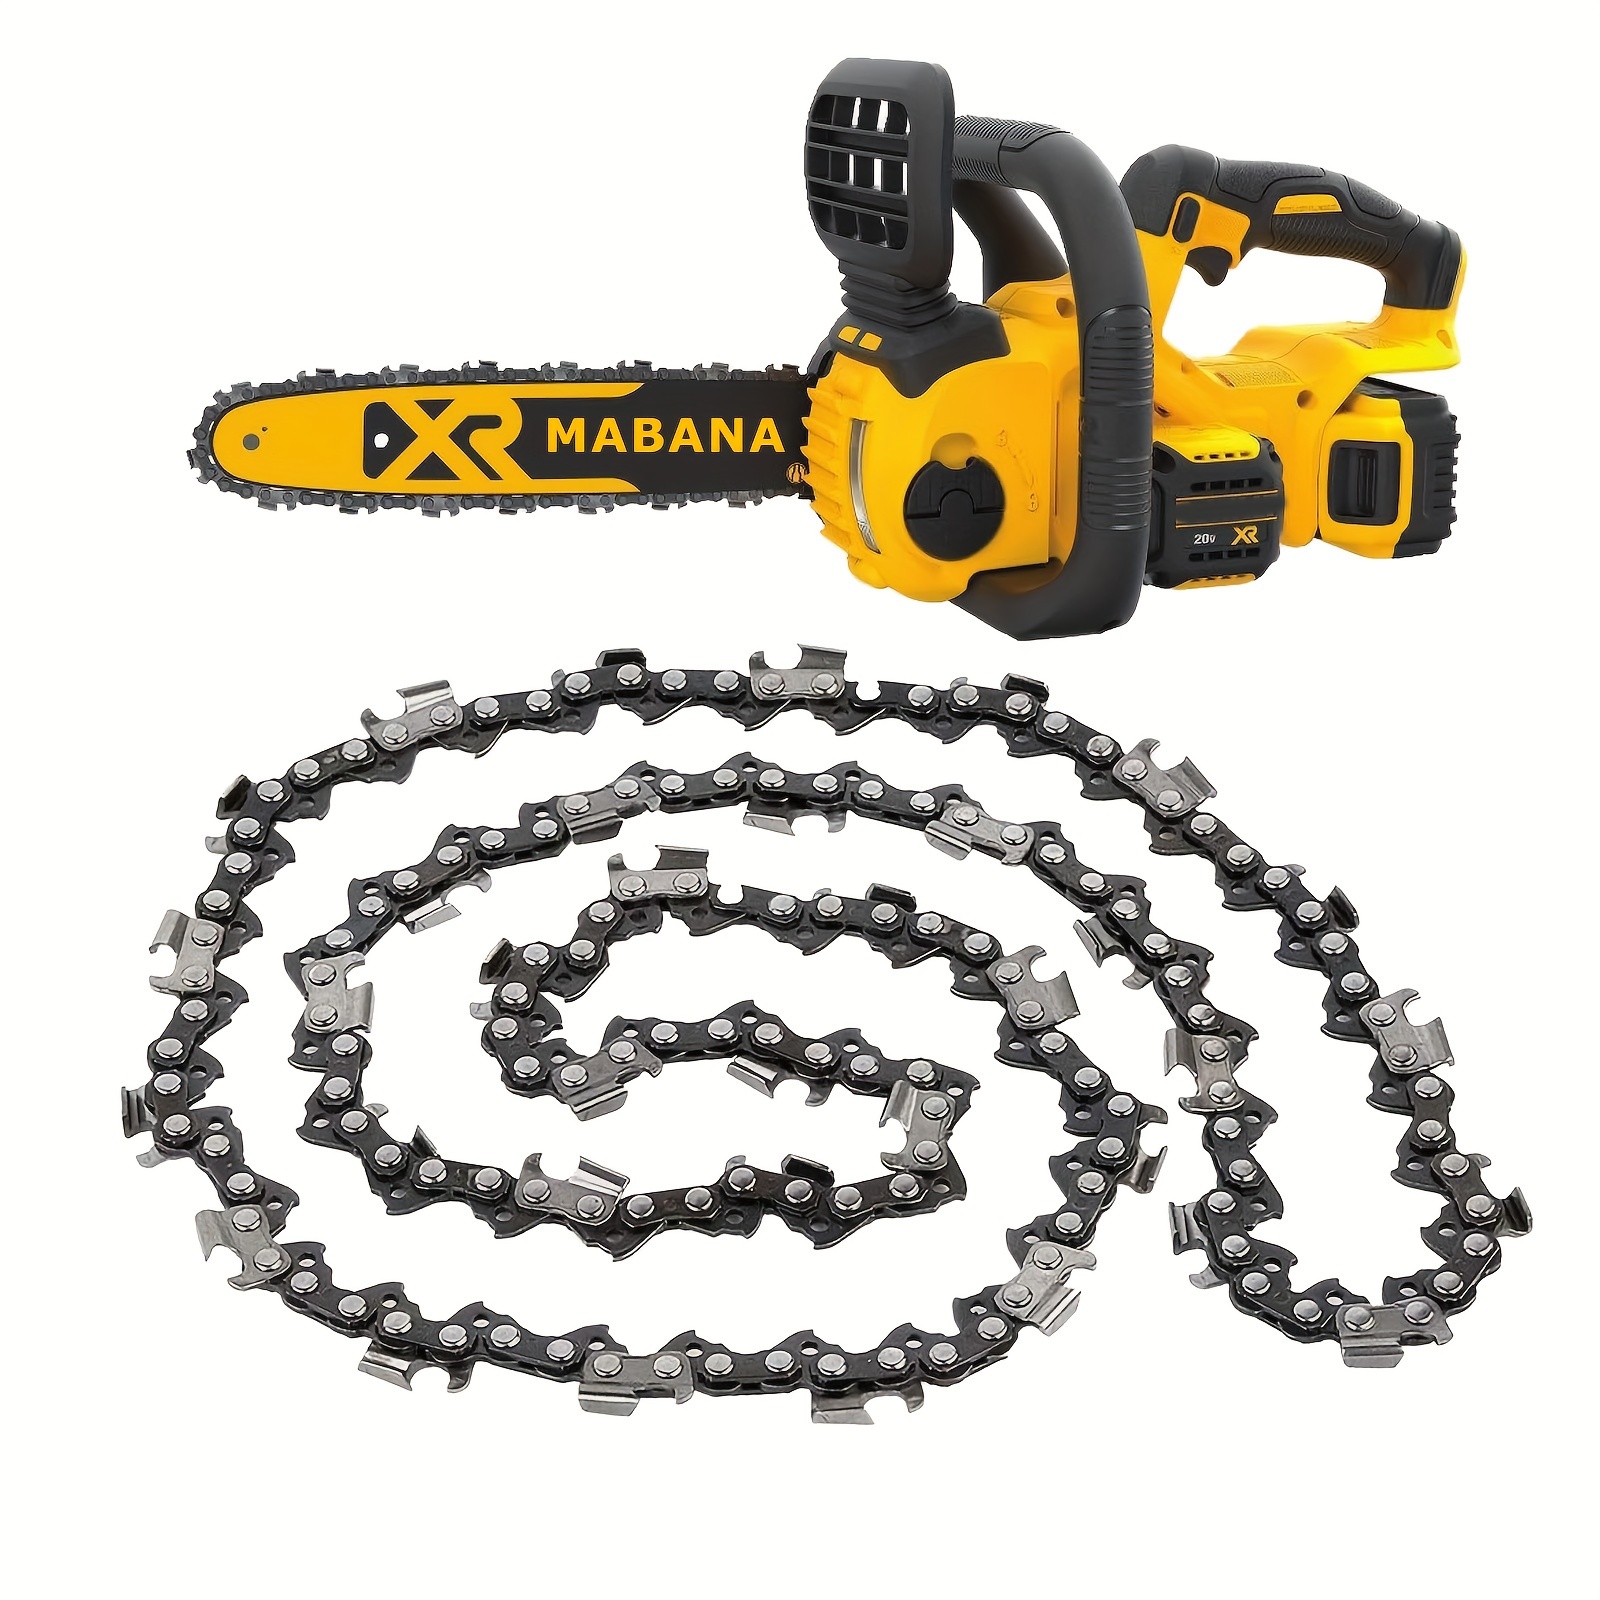 

16 Inch Chainsaw Chain - R55 -.043" Gauge, 3/8" Low Profile Pitch, 55 Dl